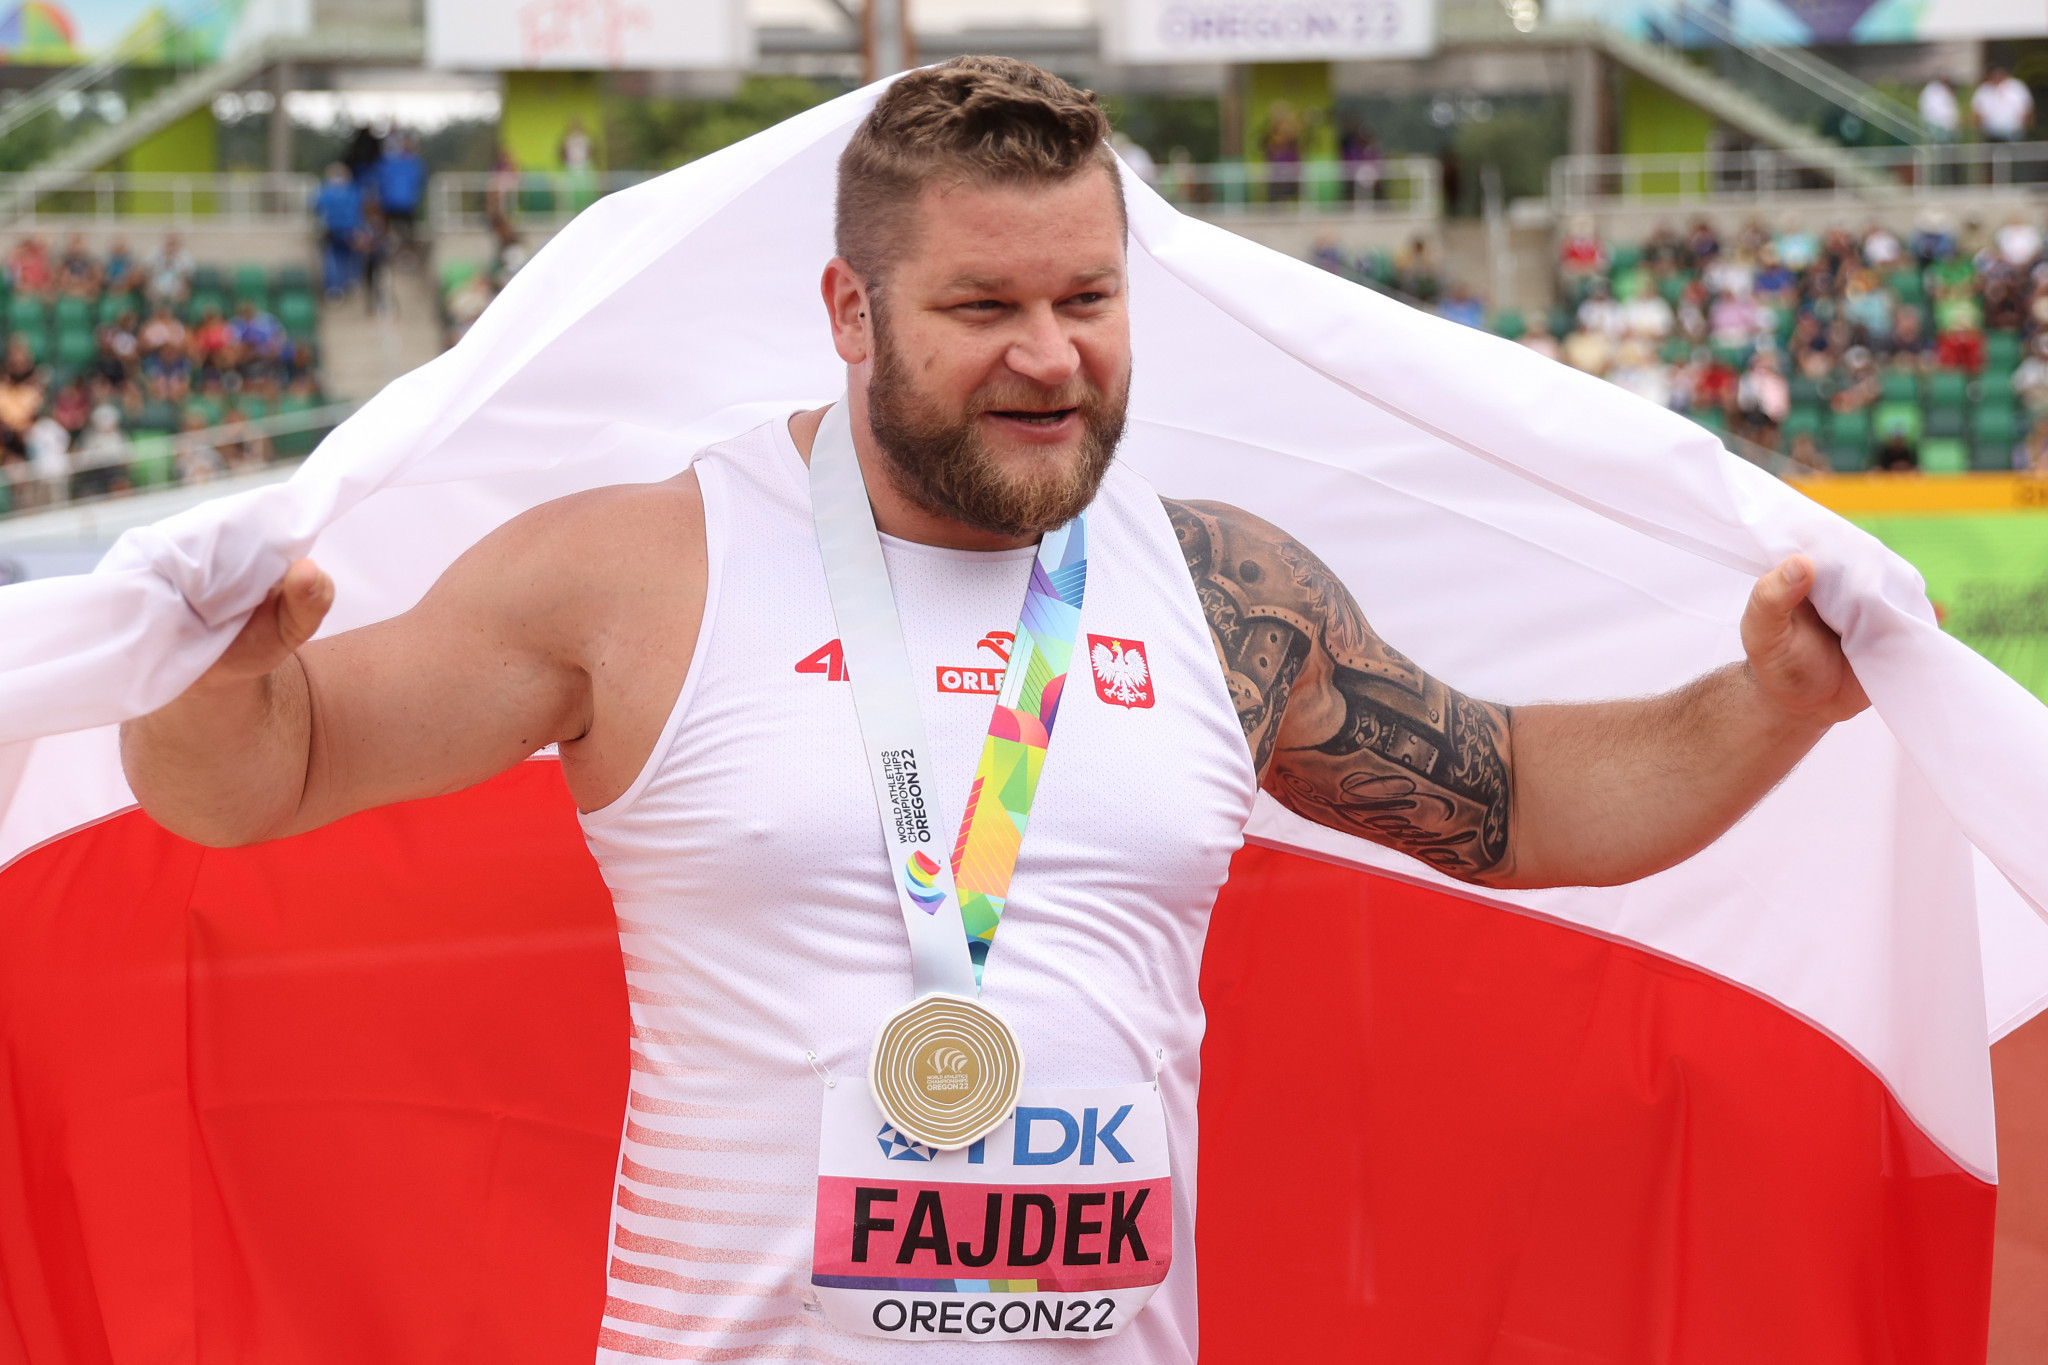 Poland’s Pawel Fajdek celebrates winning a record fifth consecutive gold medal in the hammer at the World Championships in Eugene ©Getty Images